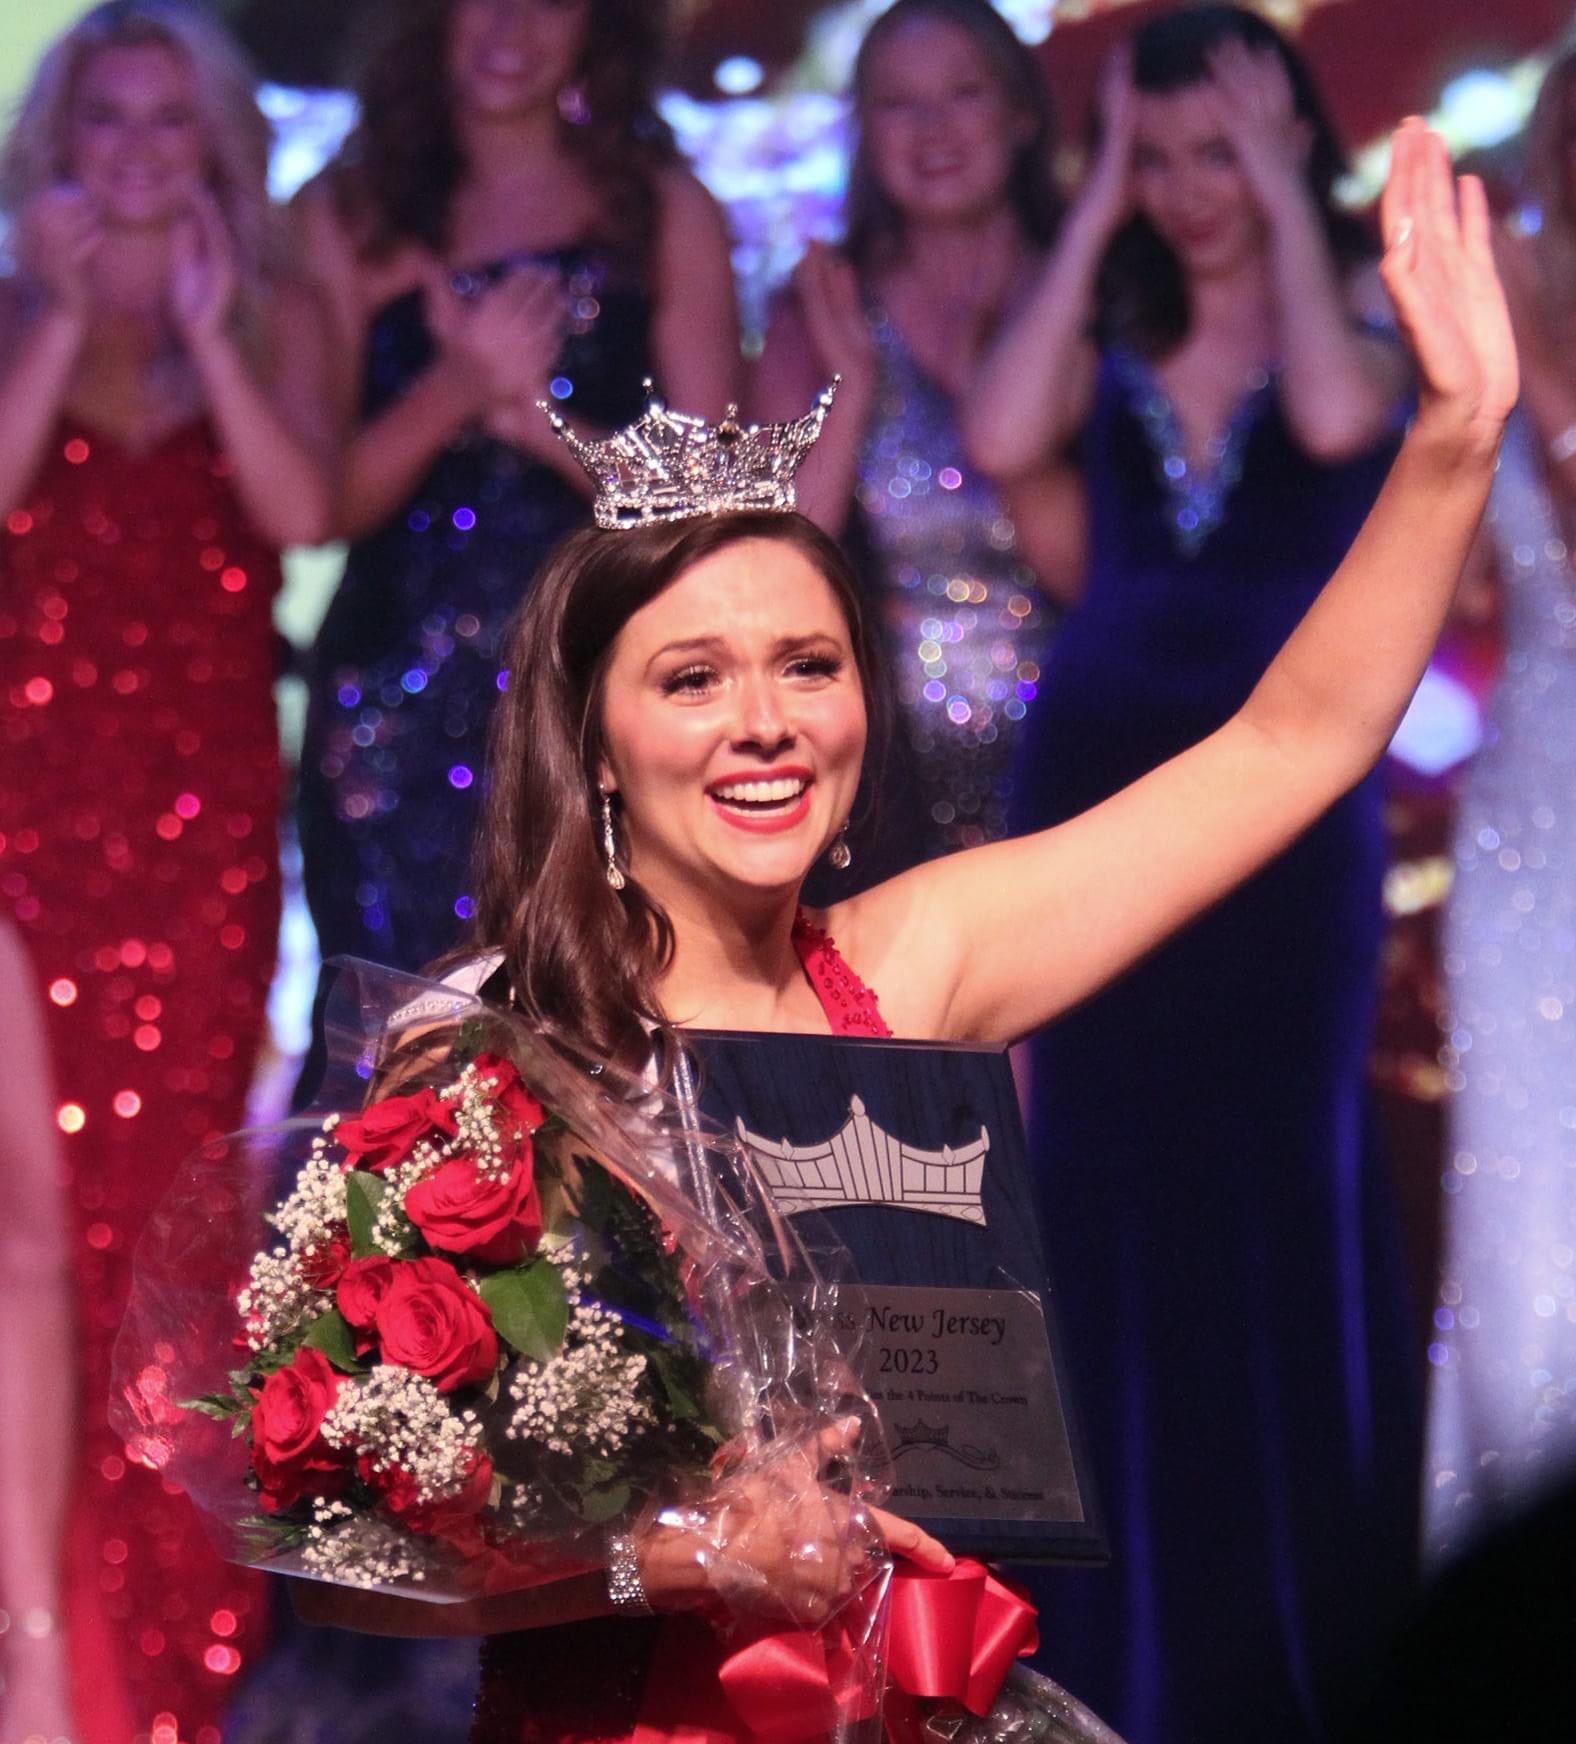 Northfield Woman Crowned Miss New Jersey | Somers Point